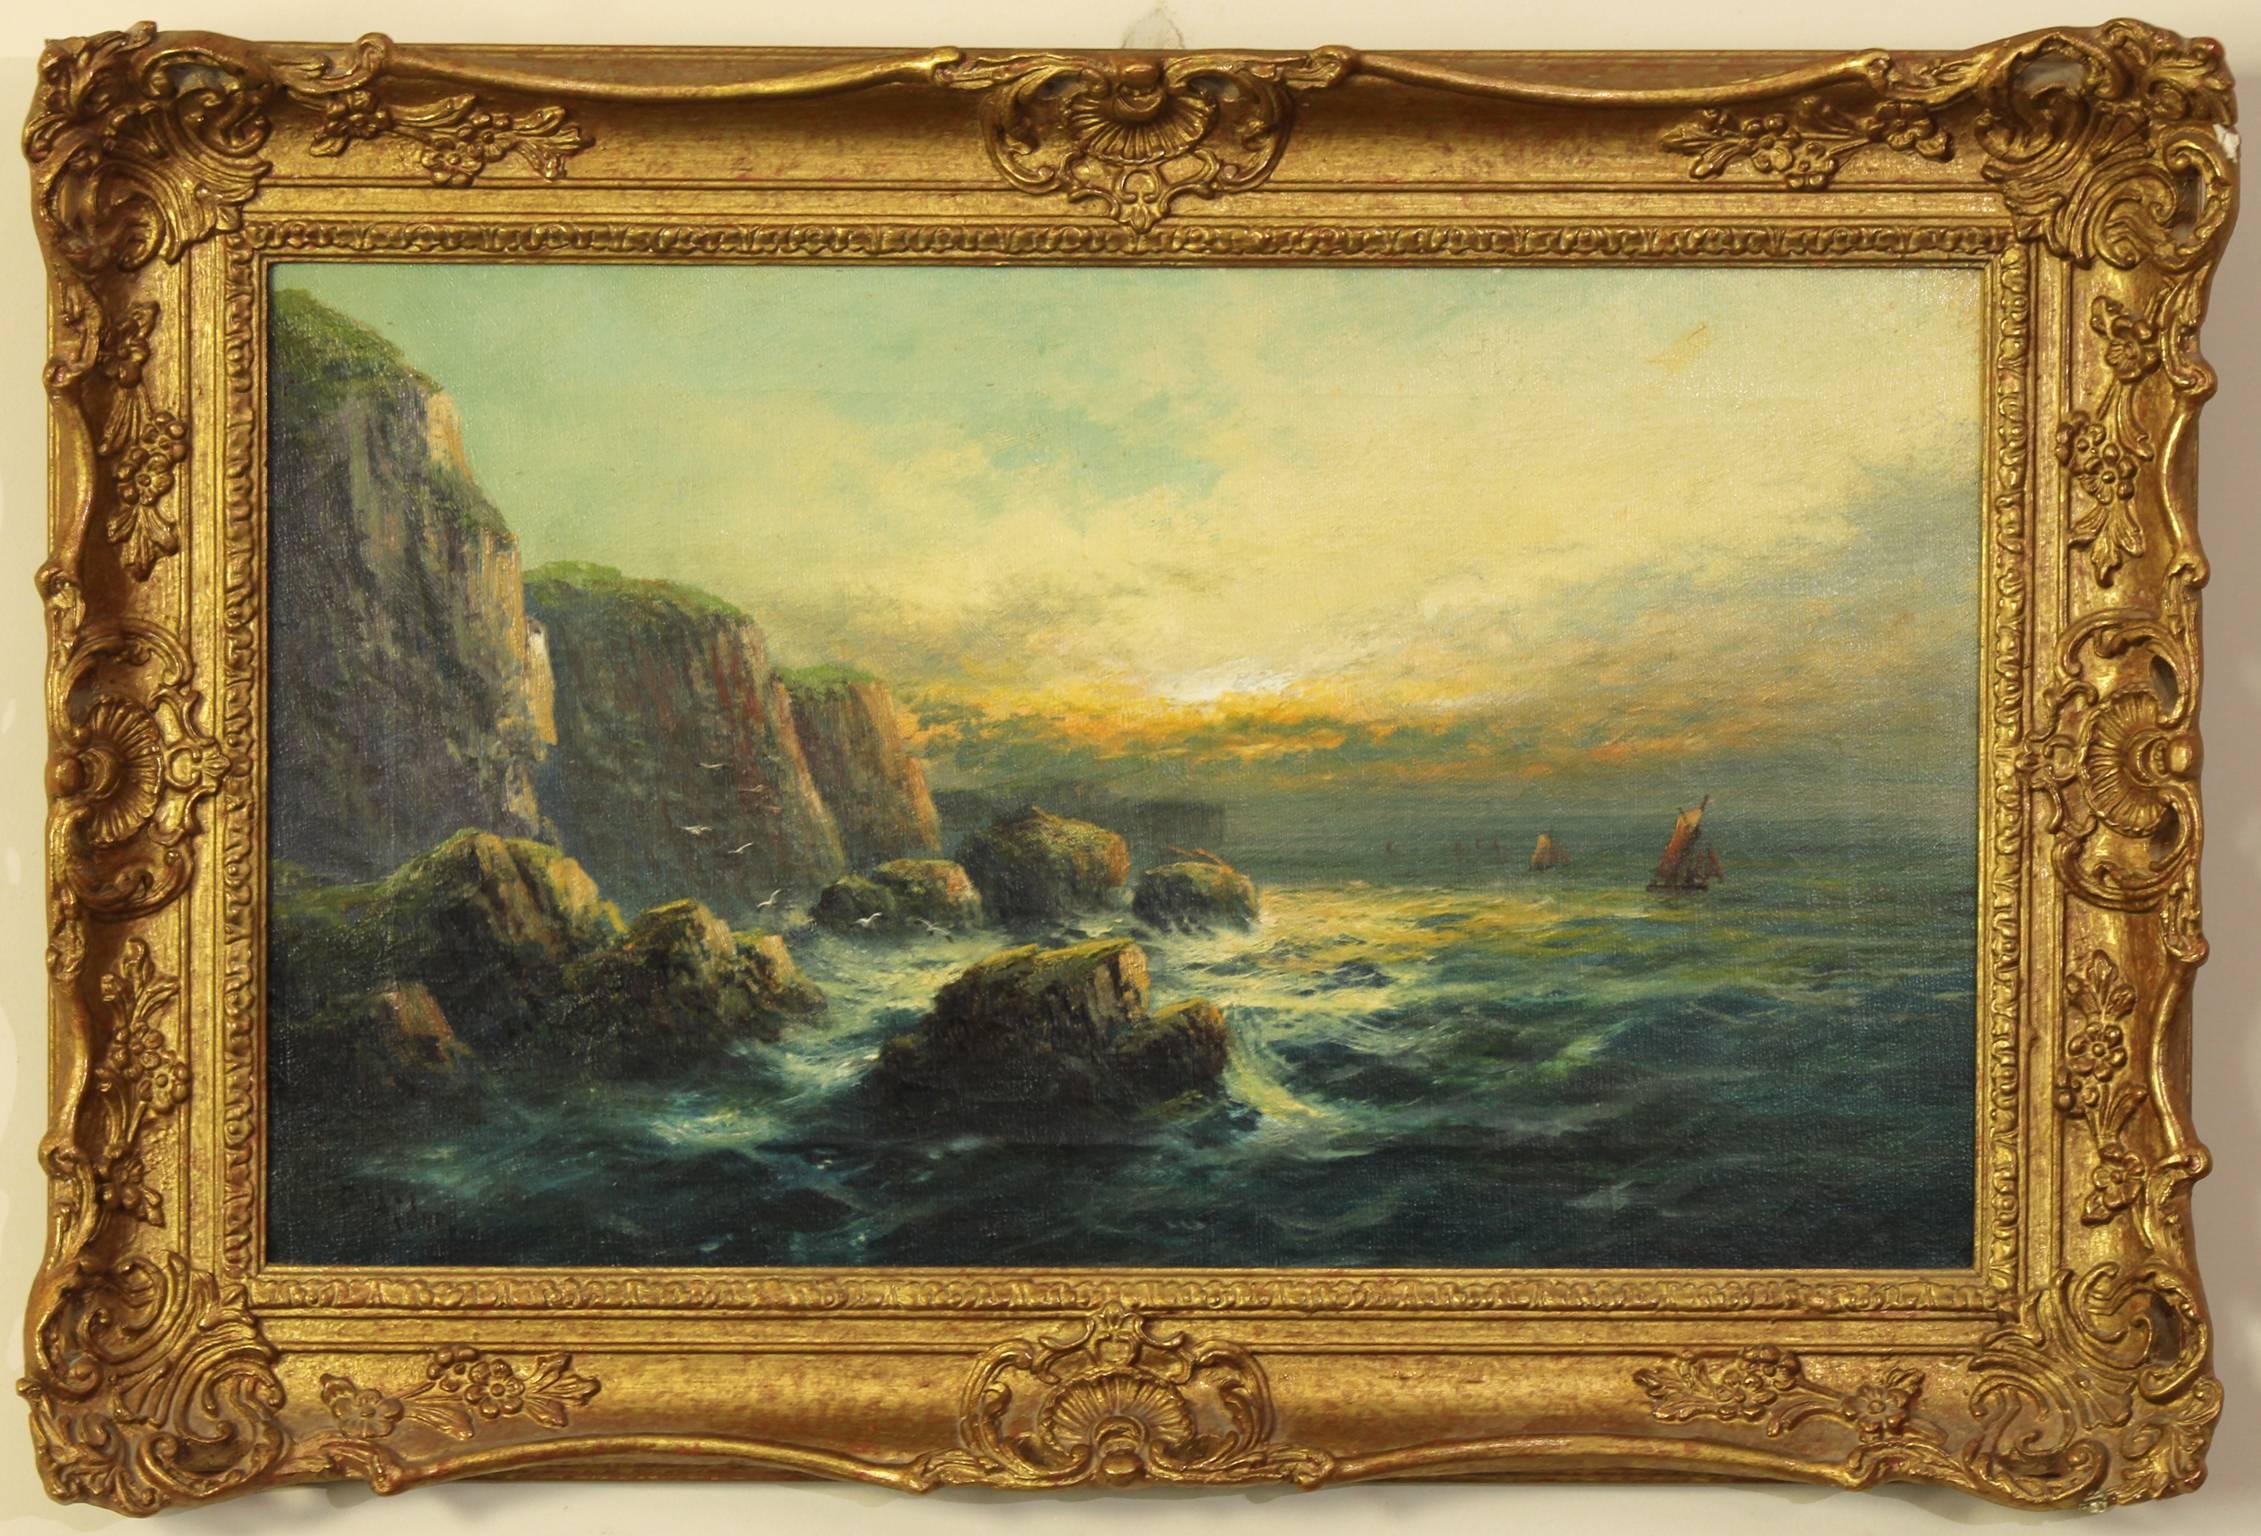 A late 19th century English oil on canvas painting of the Cornish coast with ships in the distance. Signed bottom left corner with title, 